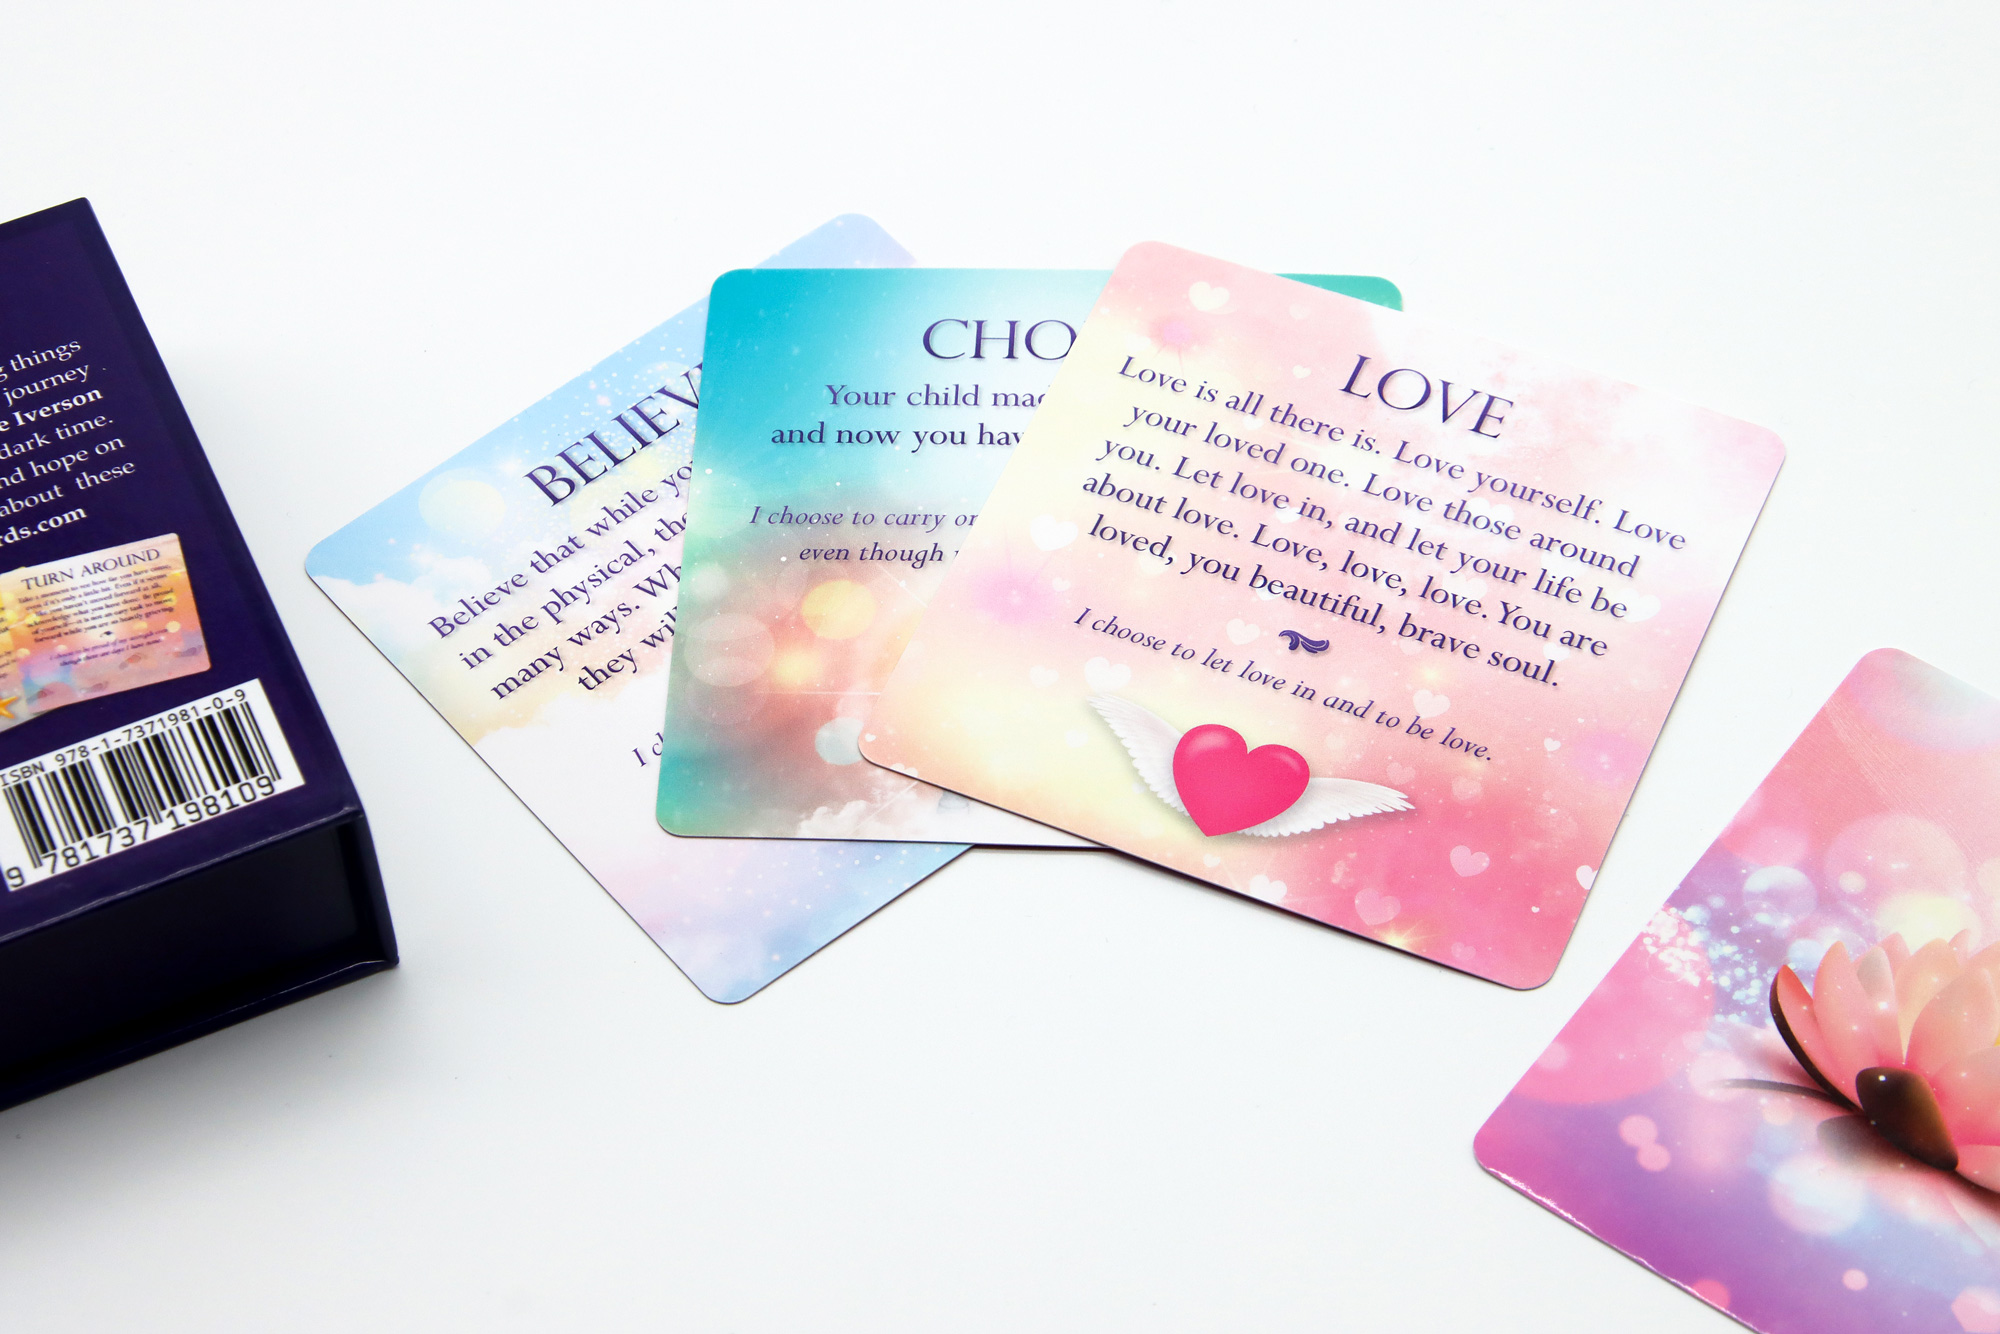 Solace Cards (Lisa Iverson)